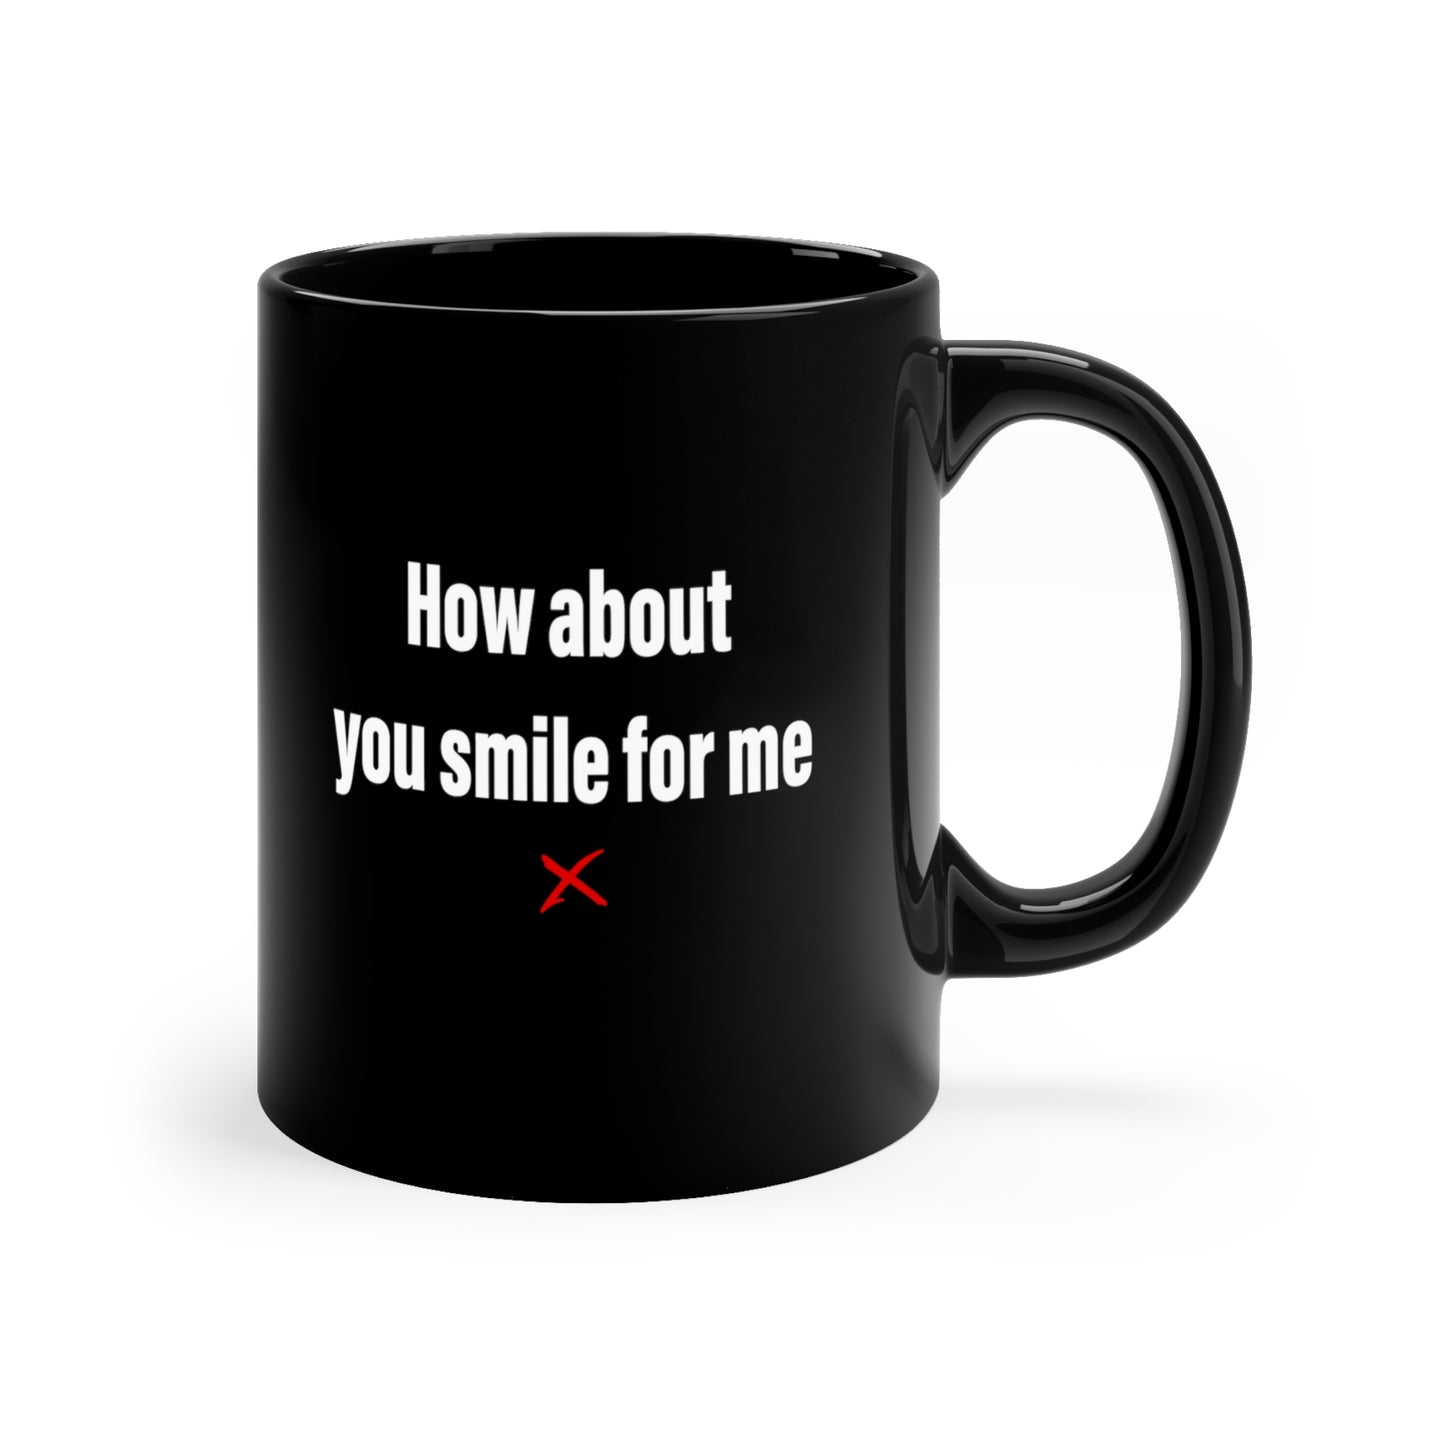 How about you smile for me - Mug